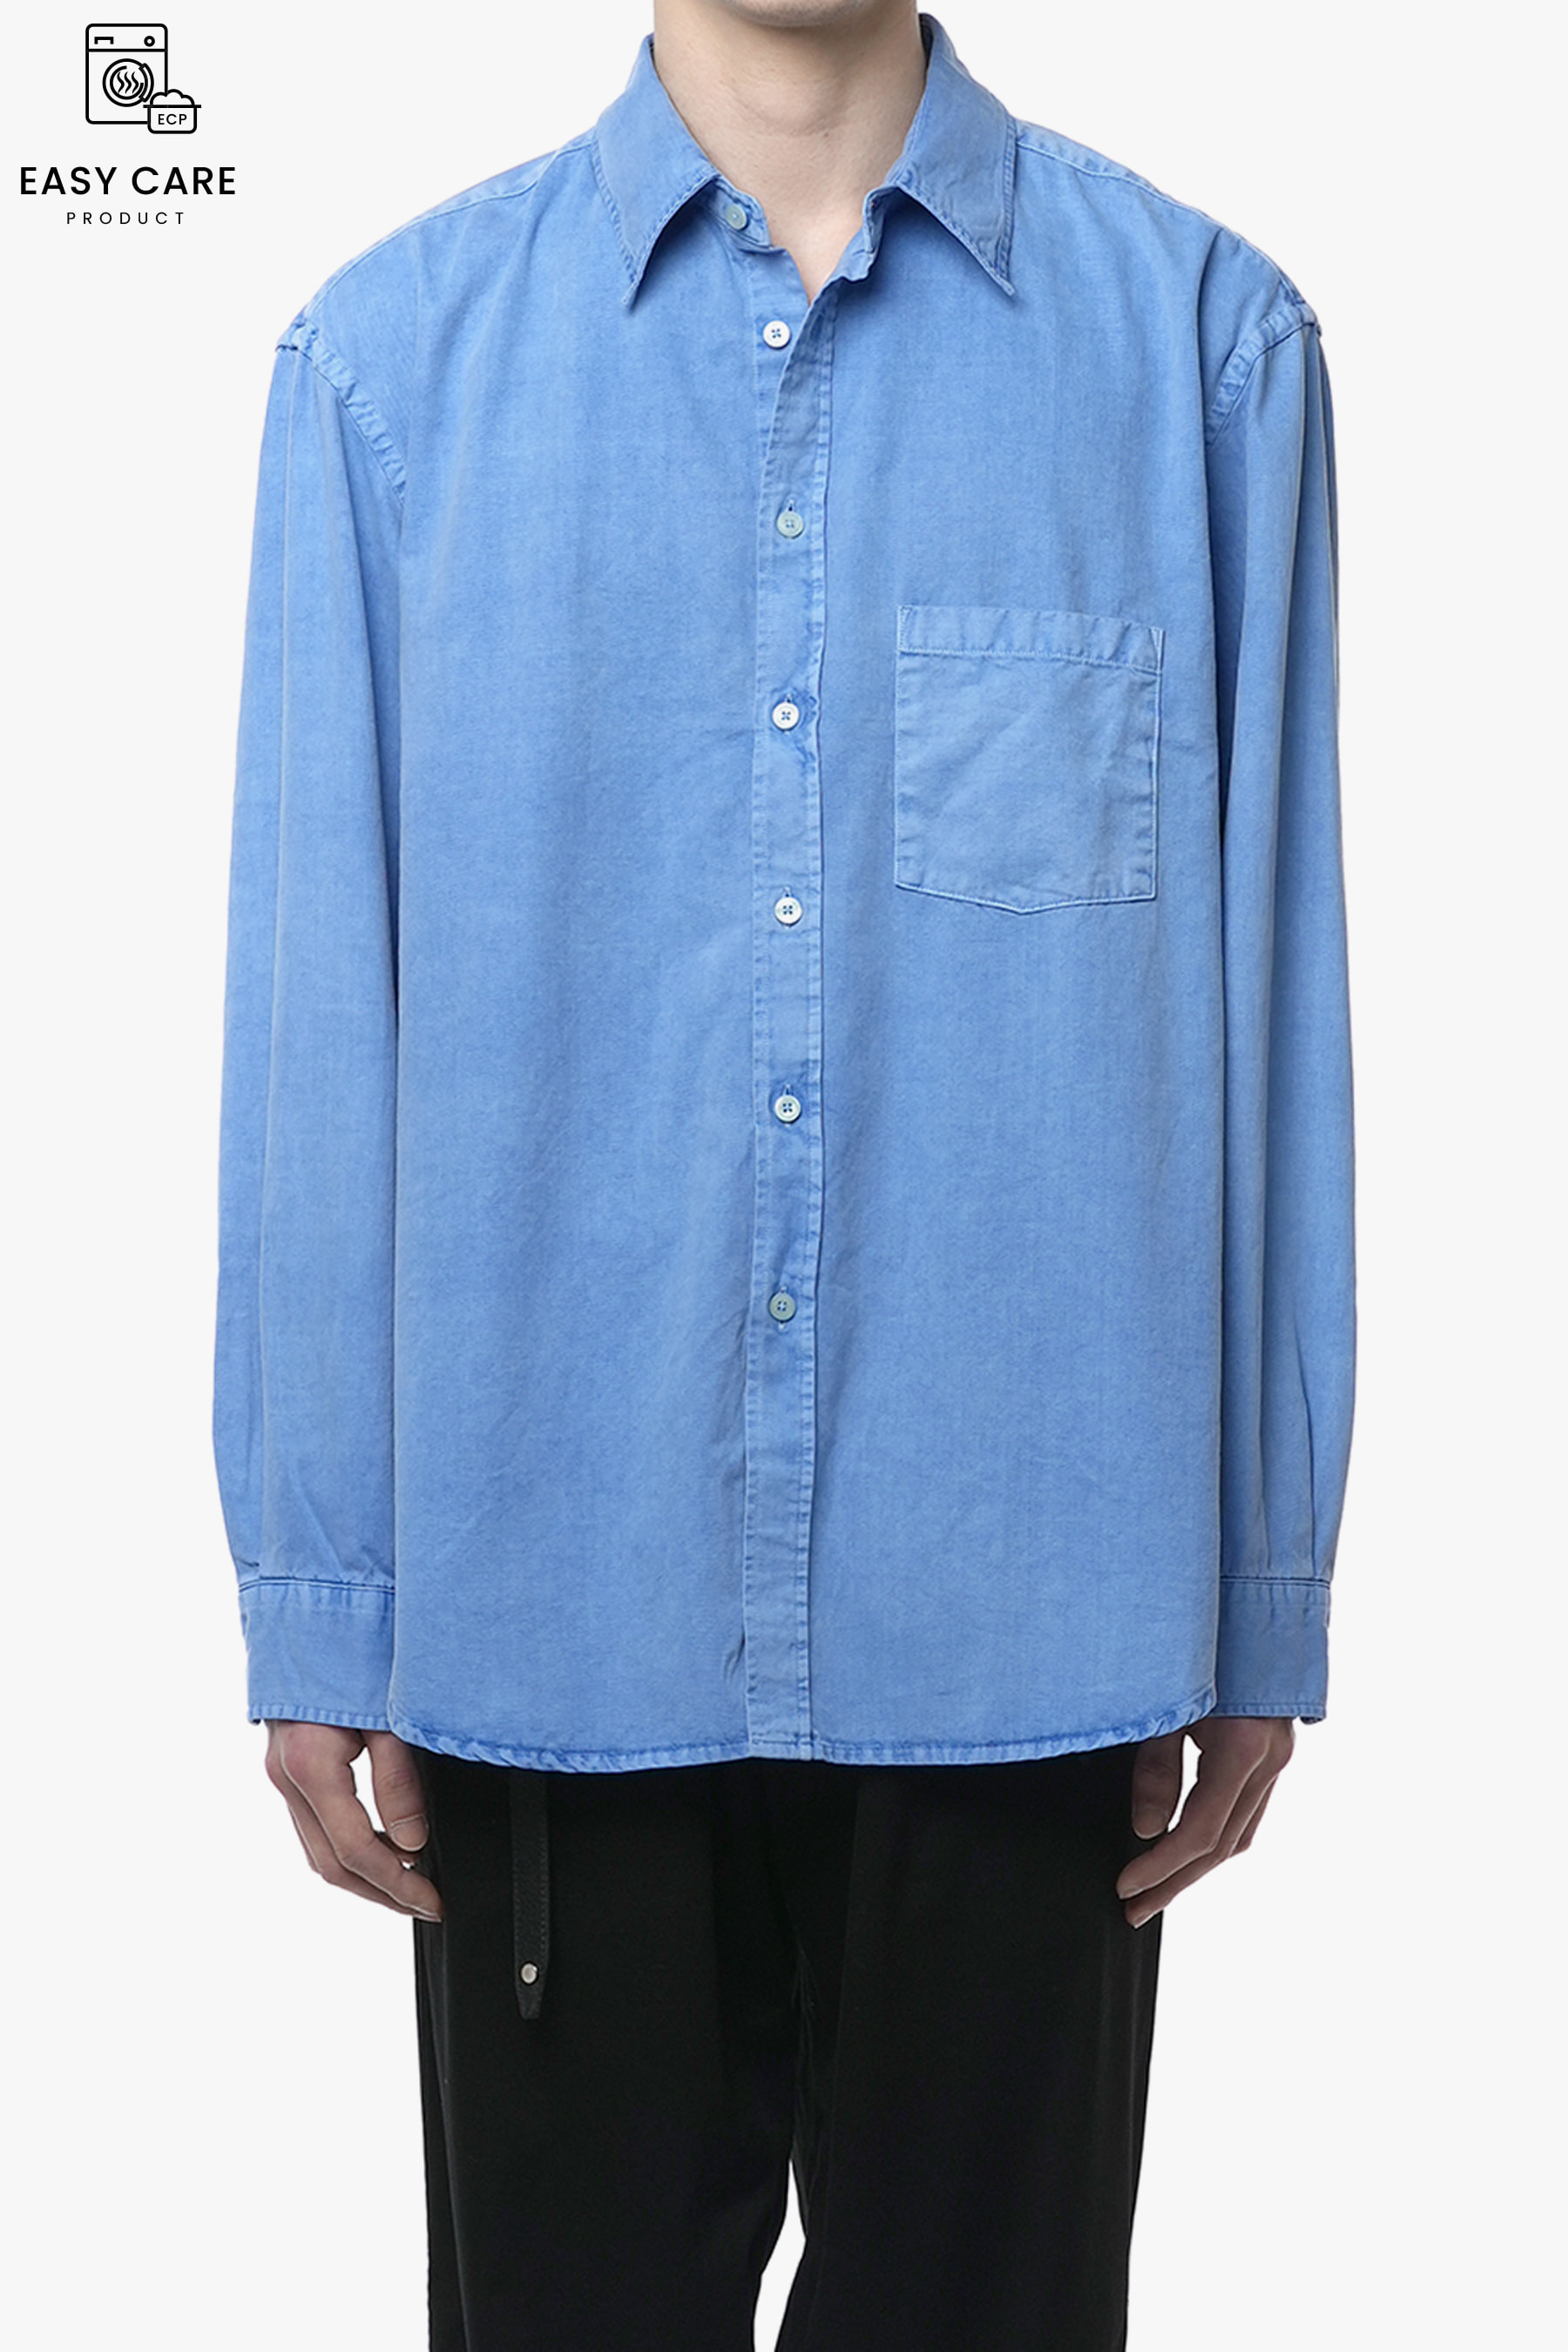 [PO 5/22 순차발송] V.2 DUSTY BLUE YRS POIKA OVER DYED COTTON DRILL SHIRTS CLASSIC FIT (ECP GARMENT DYED)